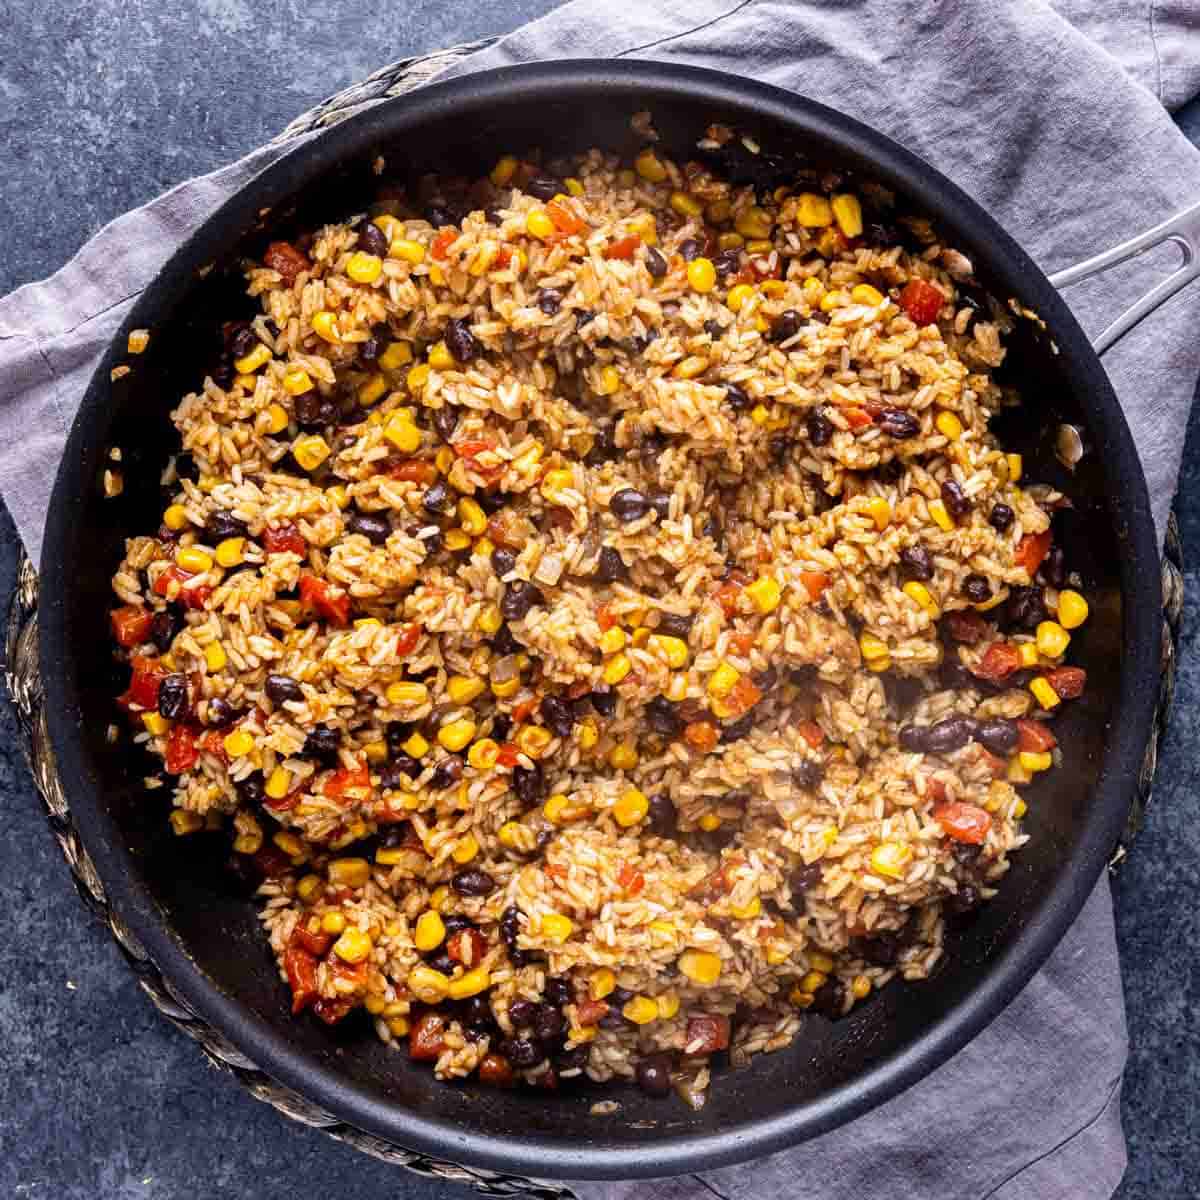 A skillet filled with One Pot Mexican Chicken and Rice, beans, corn, and vegetables.